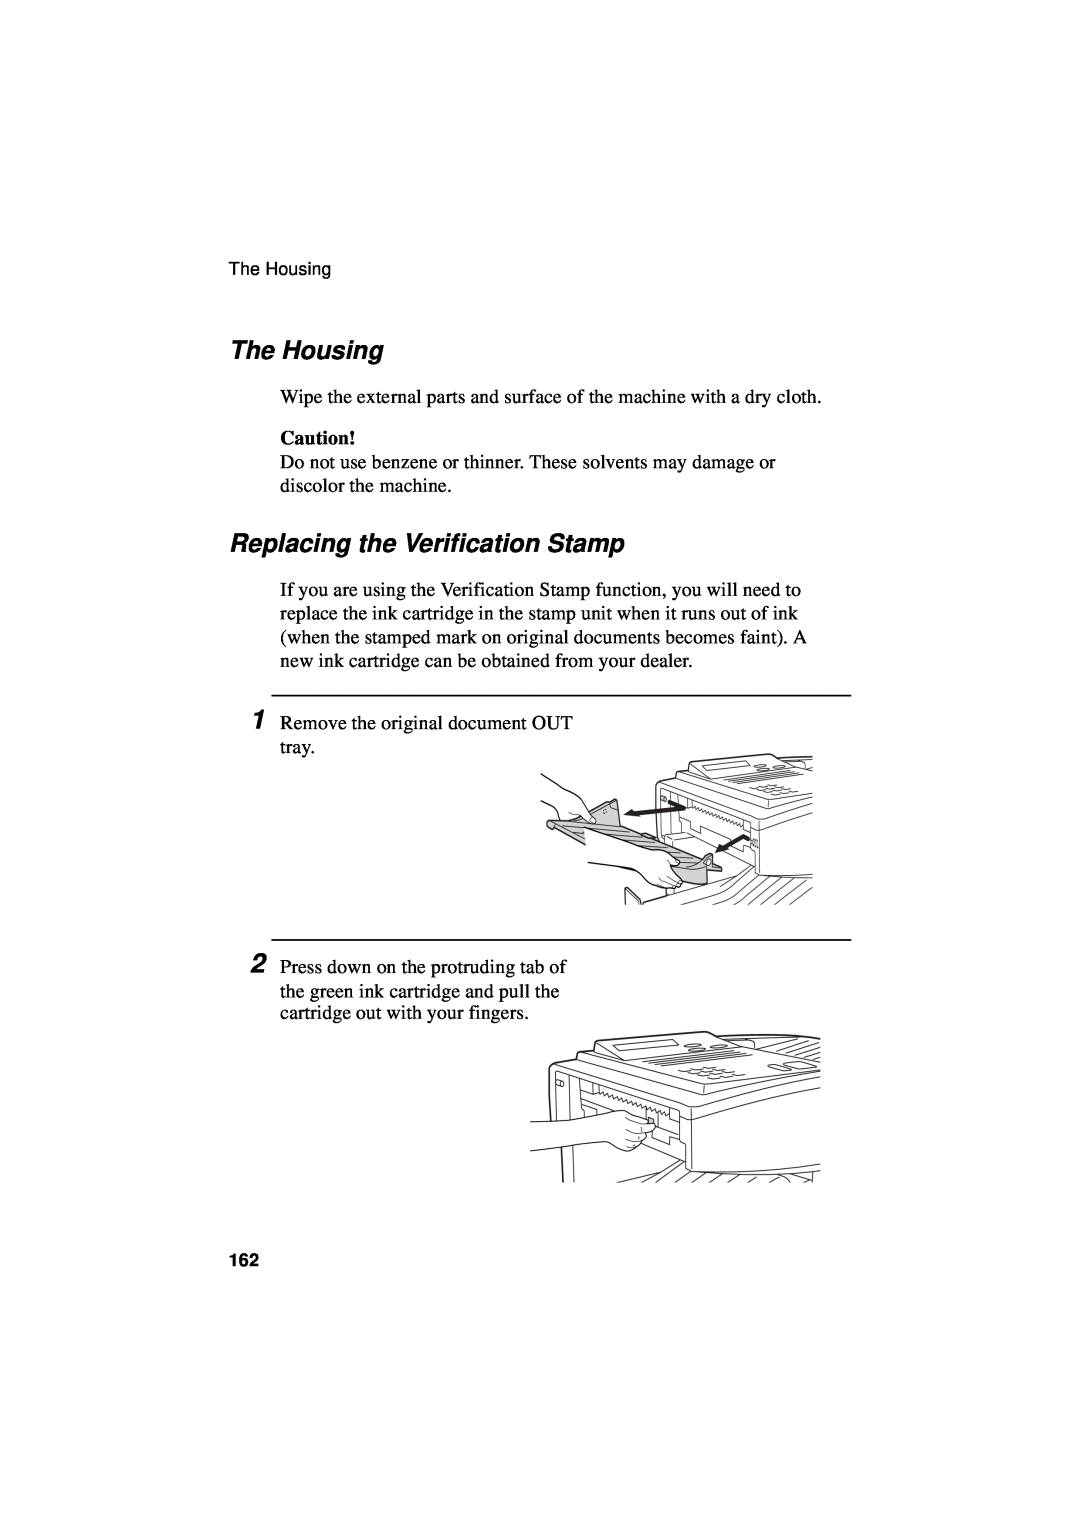 Sharp FO-5550, FO-5700, FO-4700 operation manual The Housing, Replacing the Verification Stamp 